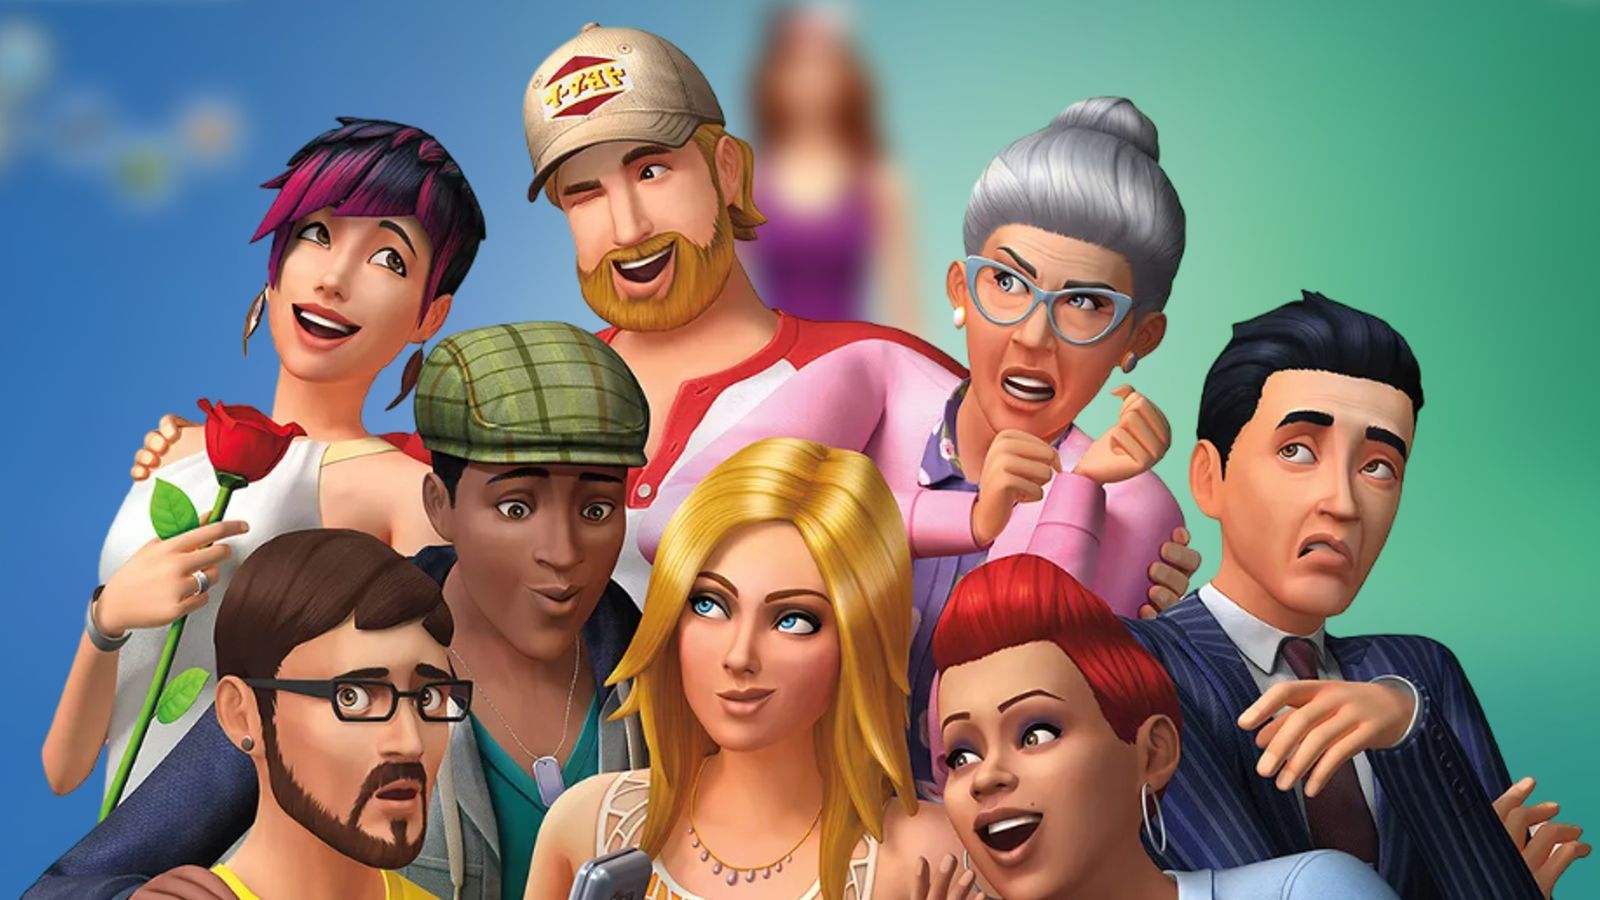 A group of The Sims characters pulling faces together